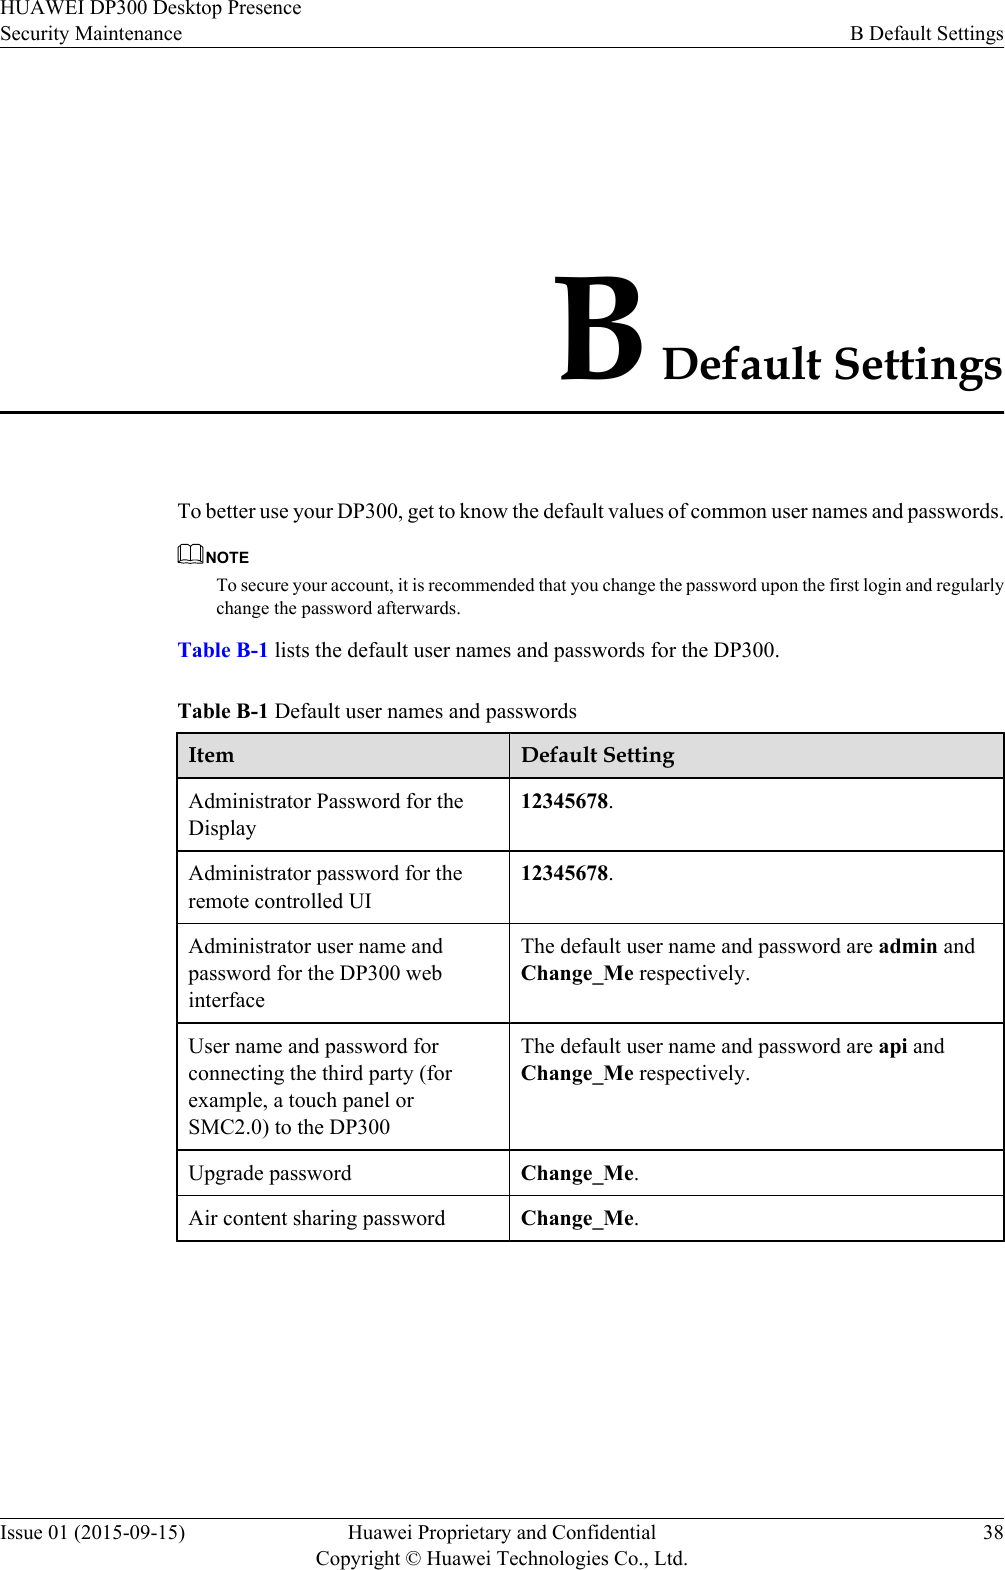 B Default SettingsTo better use your DP300, get to know the default values of common user names and passwords.NOTETo secure your account, it is recommended that you change the password upon the first login and regularlychange the password afterwards.Table B-1 lists the default user names and passwords for the DP300.Table B-1 Default user names and passwordsItem Default SettingAdministrator Password for theDisplay12345678.Administrator password for theremote controlled UI12345678.Administrator user name andpassword for the DP300 webinterfaceThe default user name and password are admin andChange_Me respectively.User name and password forconnecting the third party (forexample, a touch panel orSMC2.0) to the DP300The default user name and password are api andChange_Me respectively.Upgrade password Change_Me.Air content sharing password Change_Me.HUAWEI DP300 Desktop PresenceSecurity Maintenance B Default SettingsIssue 01 (2015-09-15) Huawei Proprietary and ConfidentialCopyright © Huawei Technologies Co., Ltd.38